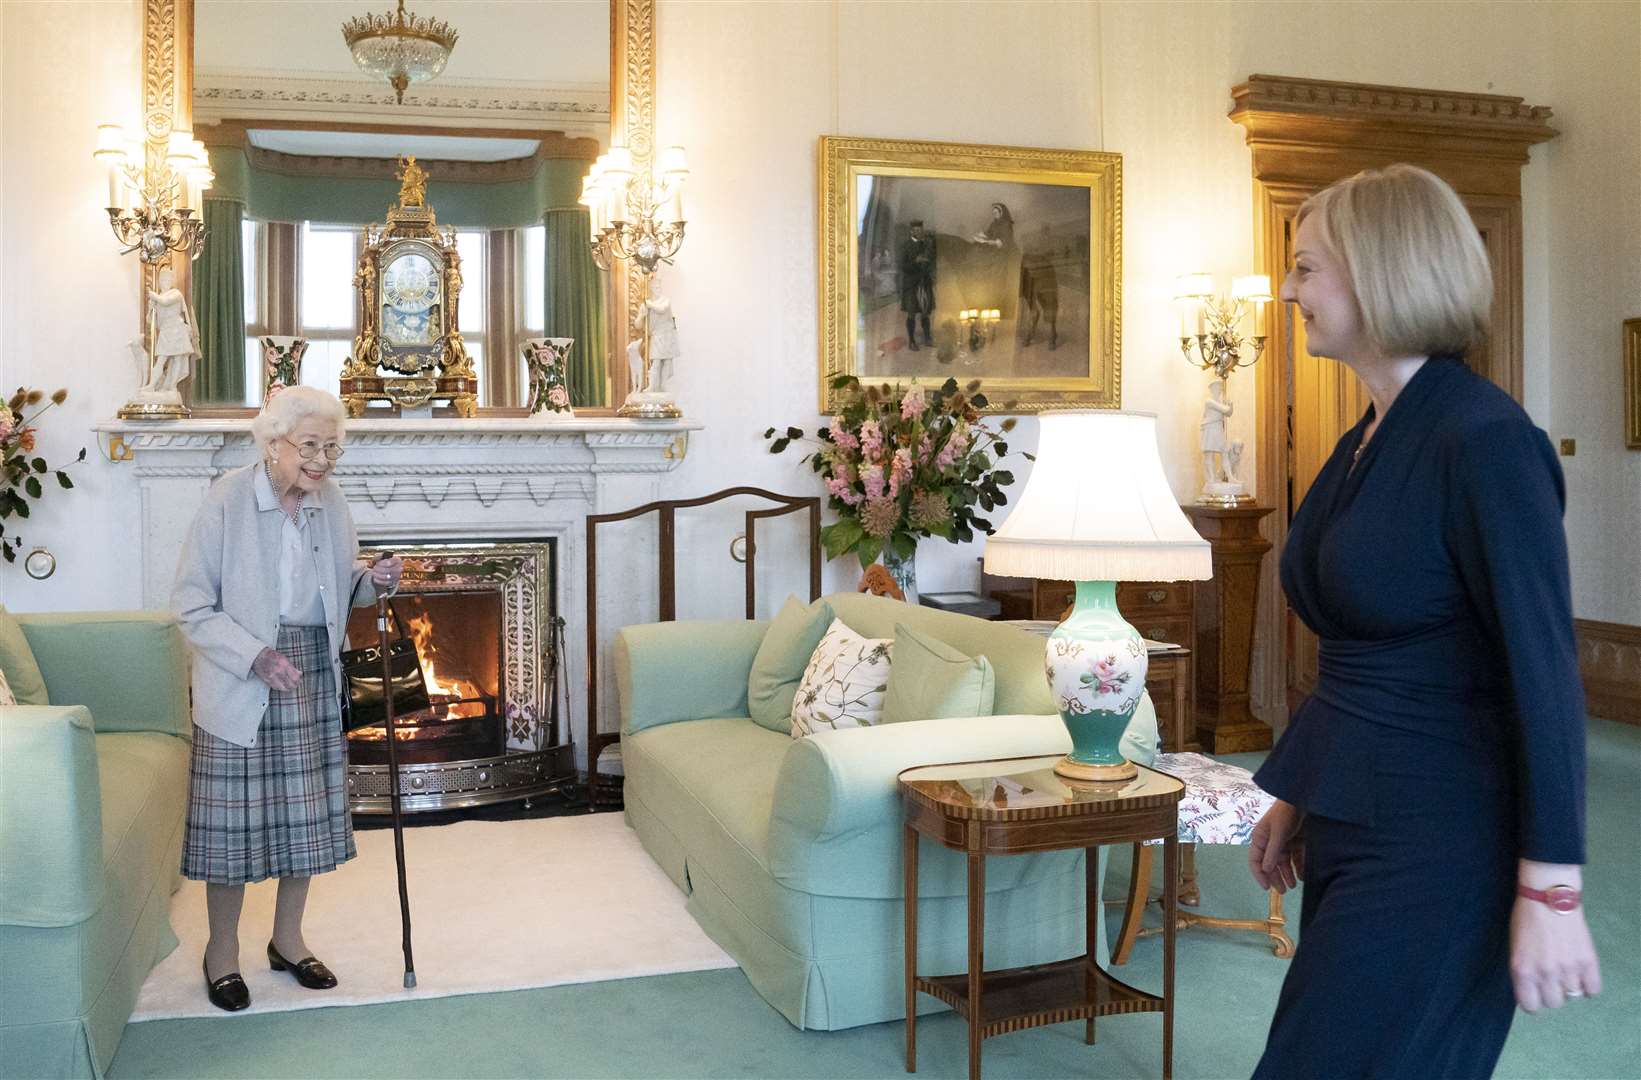 Queen Elizabeth II welcomes Liz Truss during an audience at Balmoral, Scotland, where she invited the newly elected leader of the Conservative Party to become prime minister and form a new government (Jane Barlow/PA)